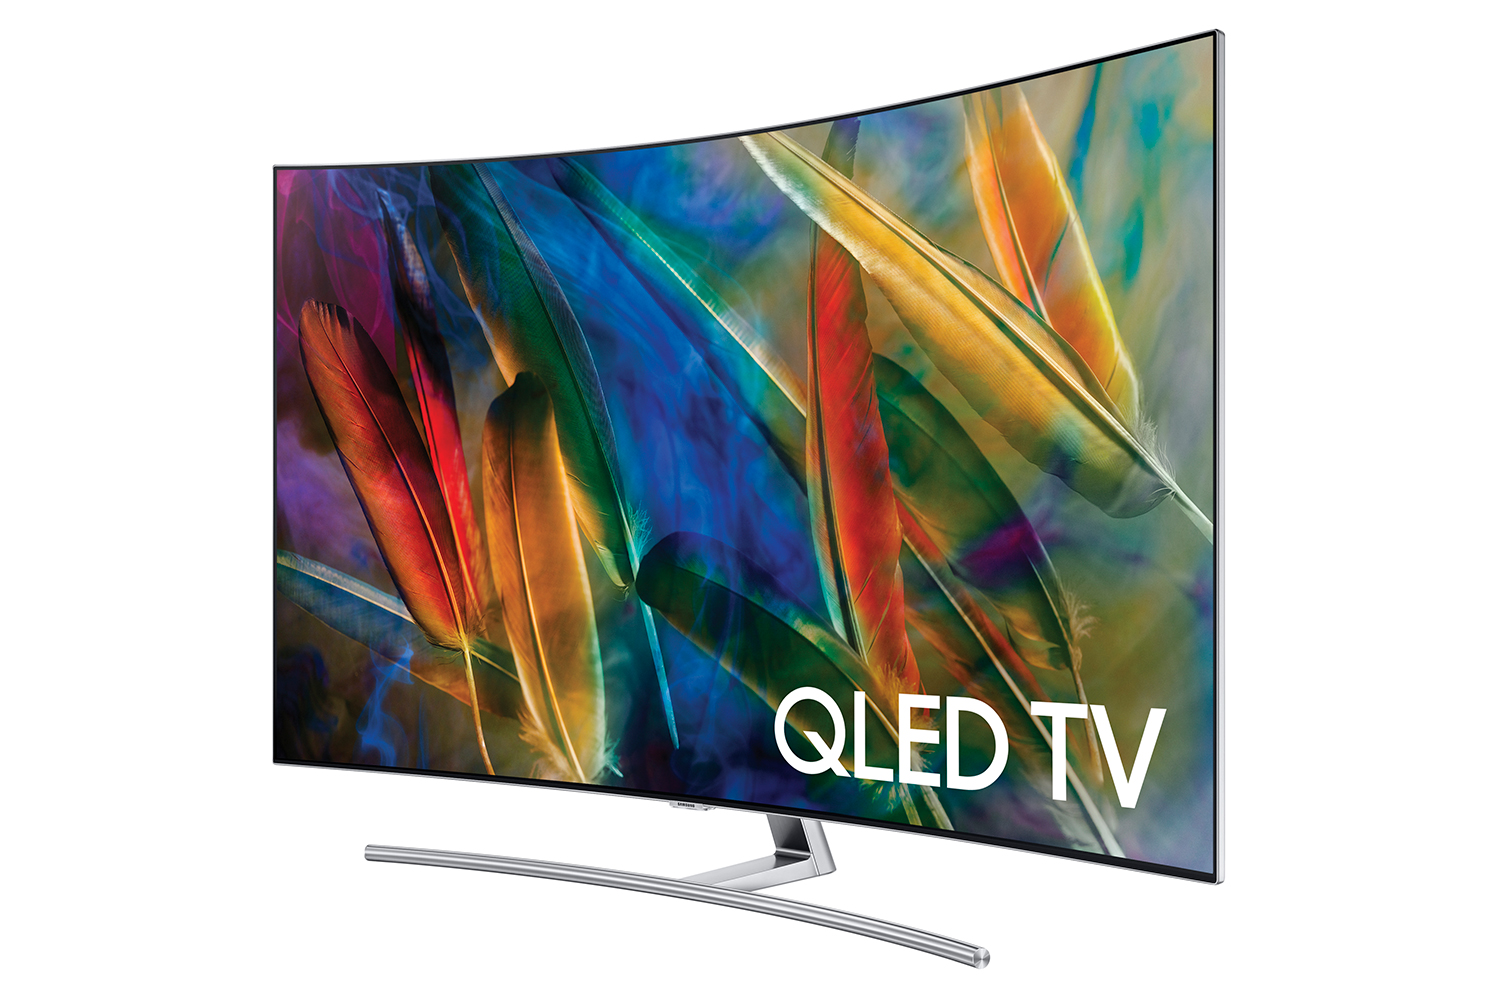 Video] We checked out Samsung's Neo QLED TVs, powered by AI - SamMobile